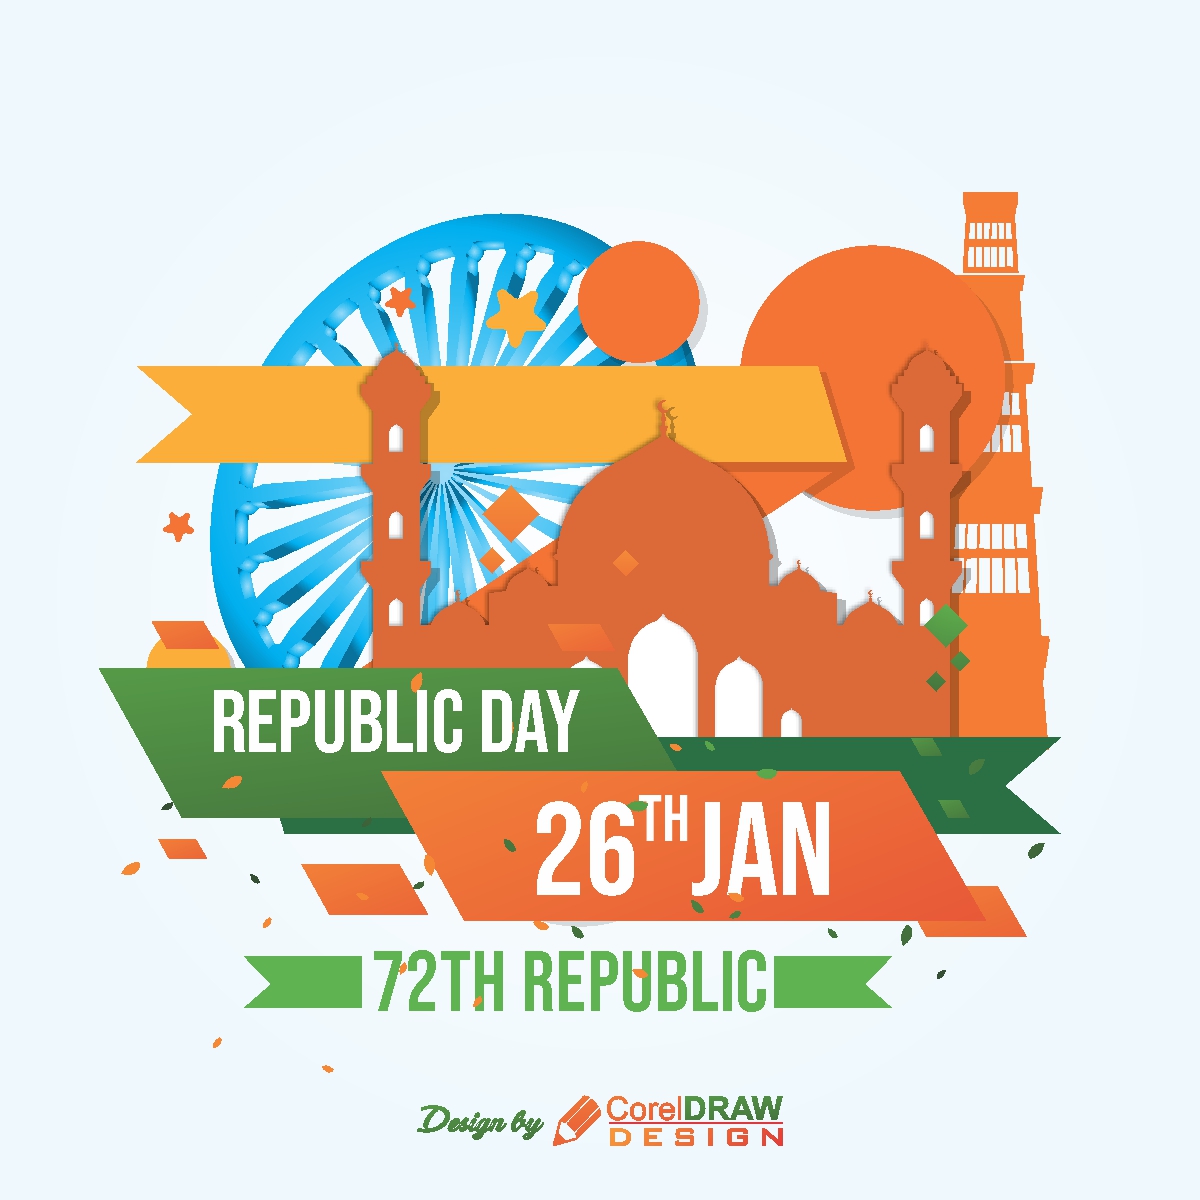 Republic day 26th jan 2021 trending cdr file download